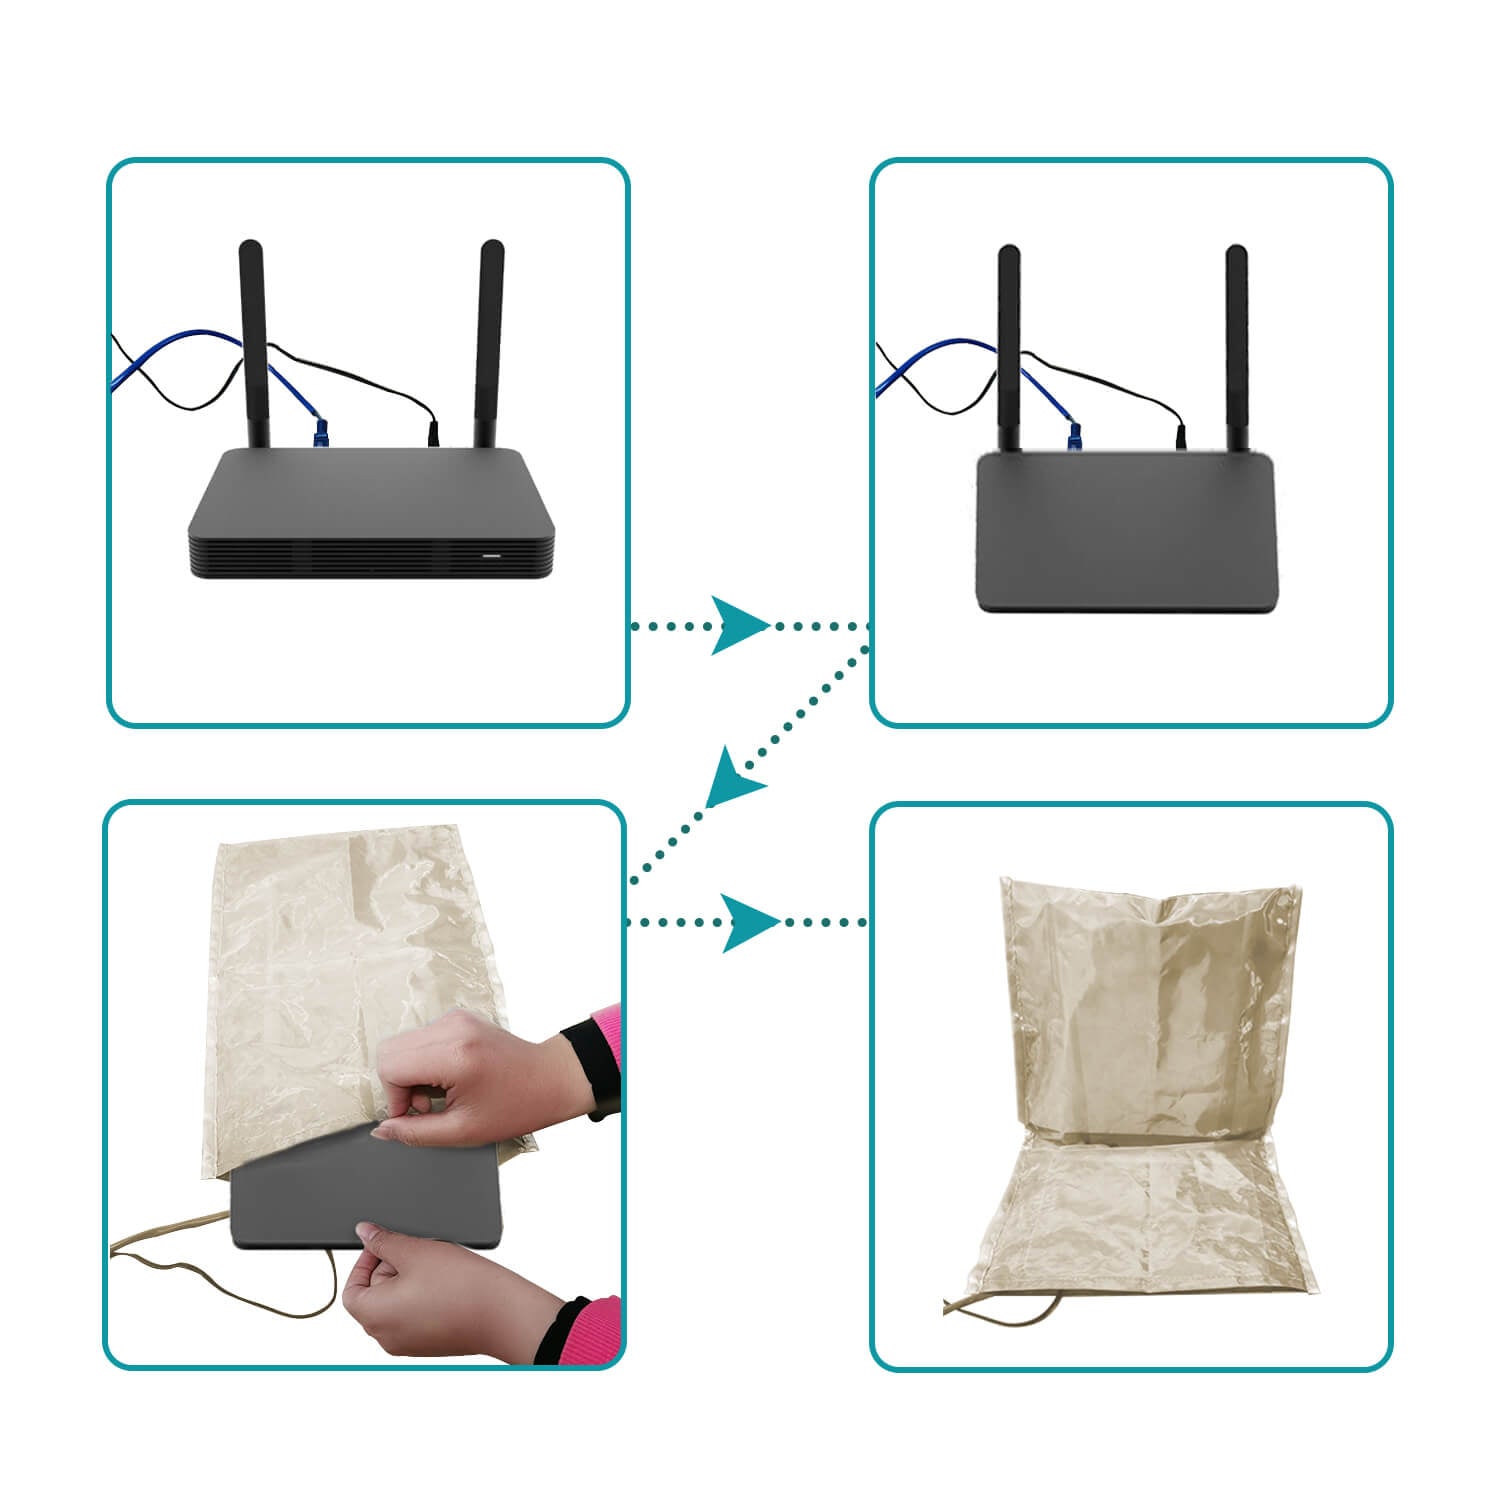 Universal Wifi Router Signal Tamer - Reduces RADIATION / EMF - GroundedKiwi.nz